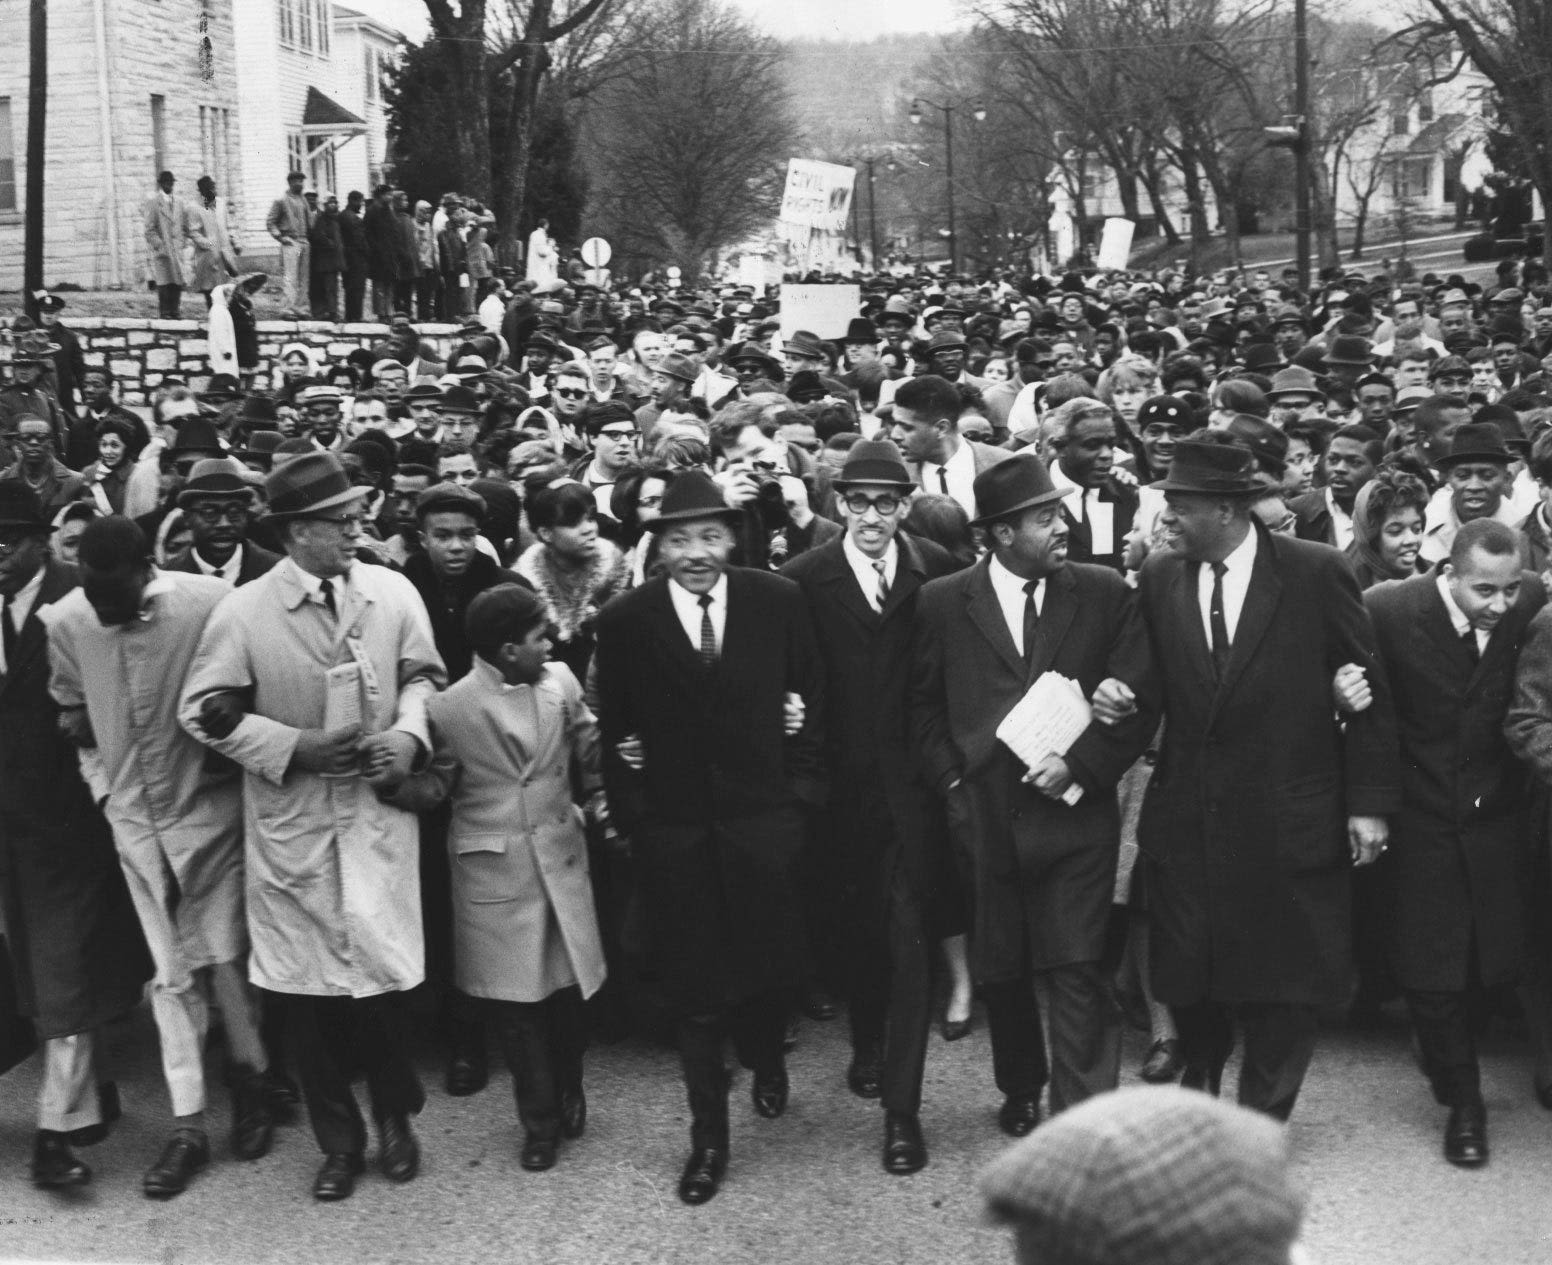 Retro Louisville: The Rev. Martin Luther King Jr. visits Louisville